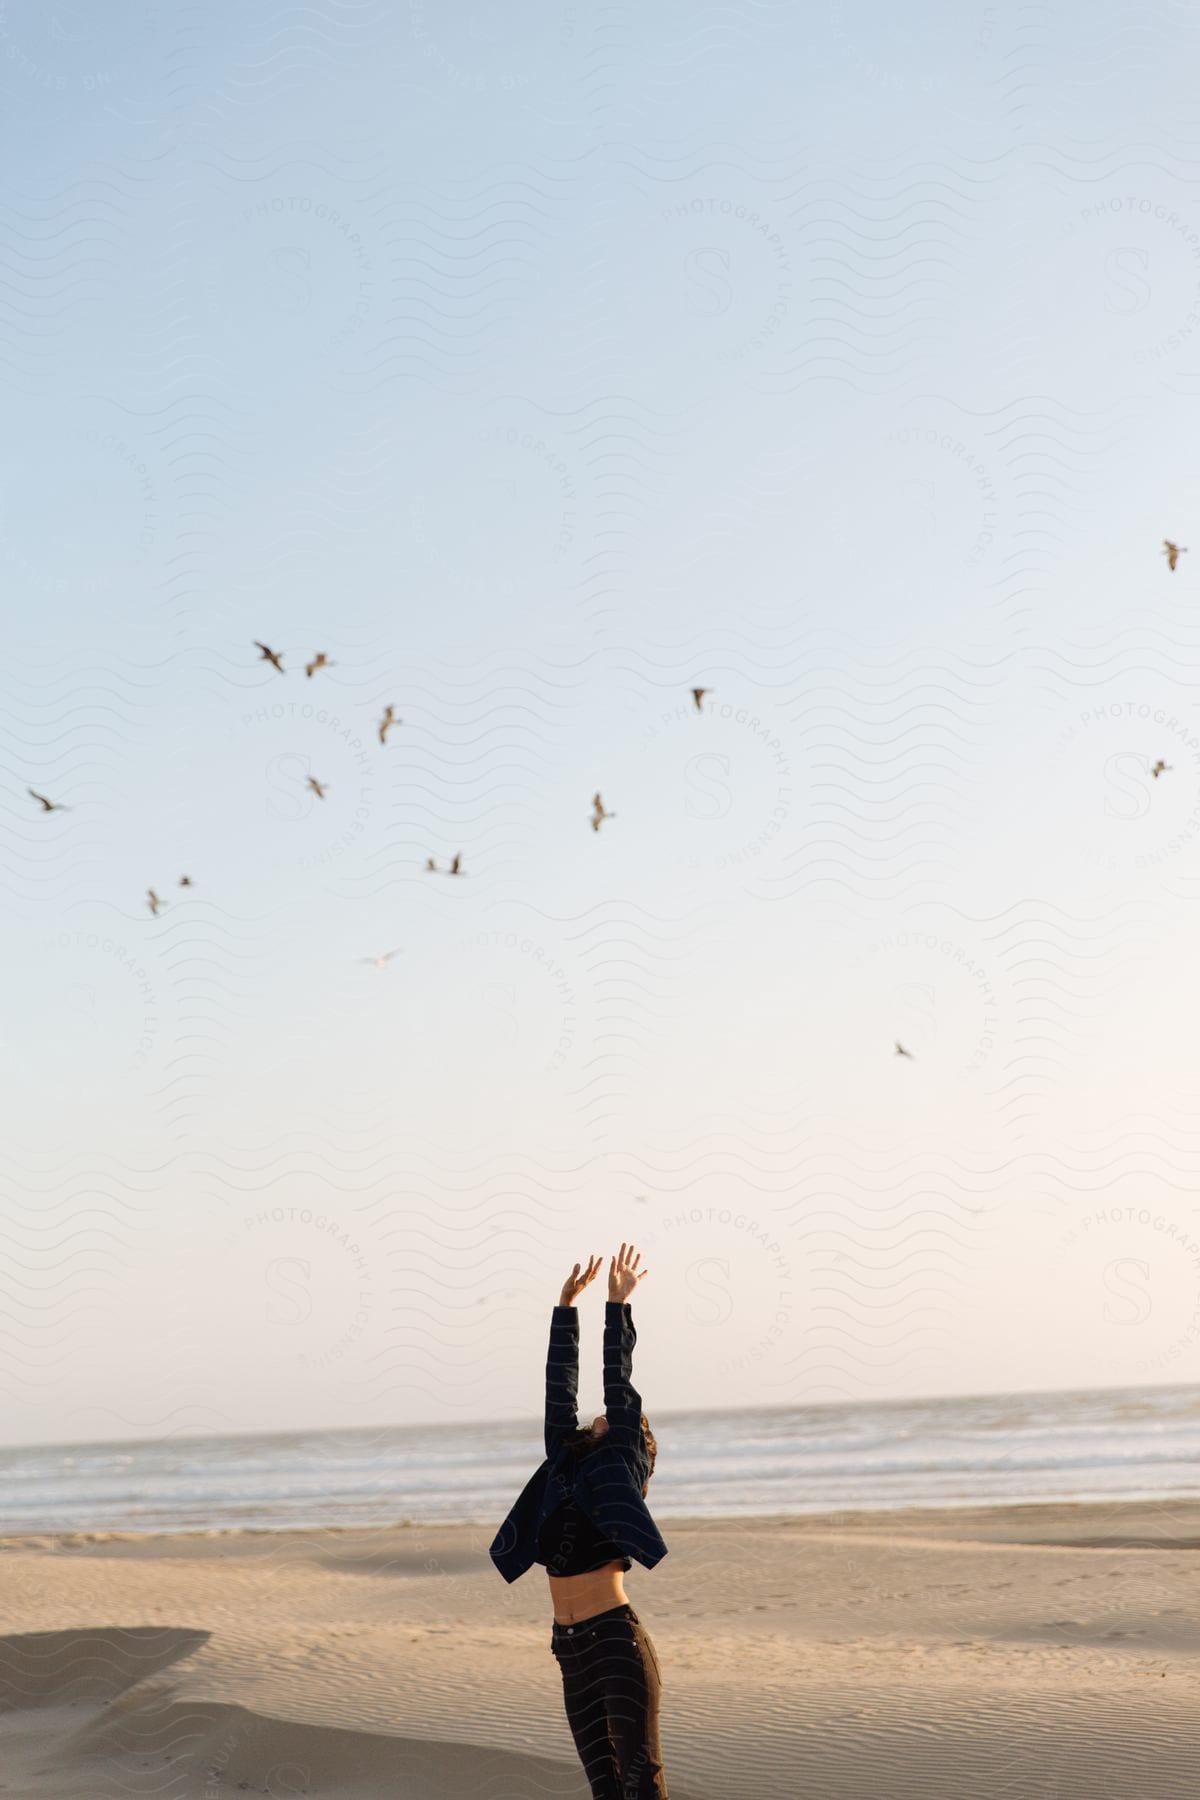 A woman on the beach reaches out to birds flying overhead